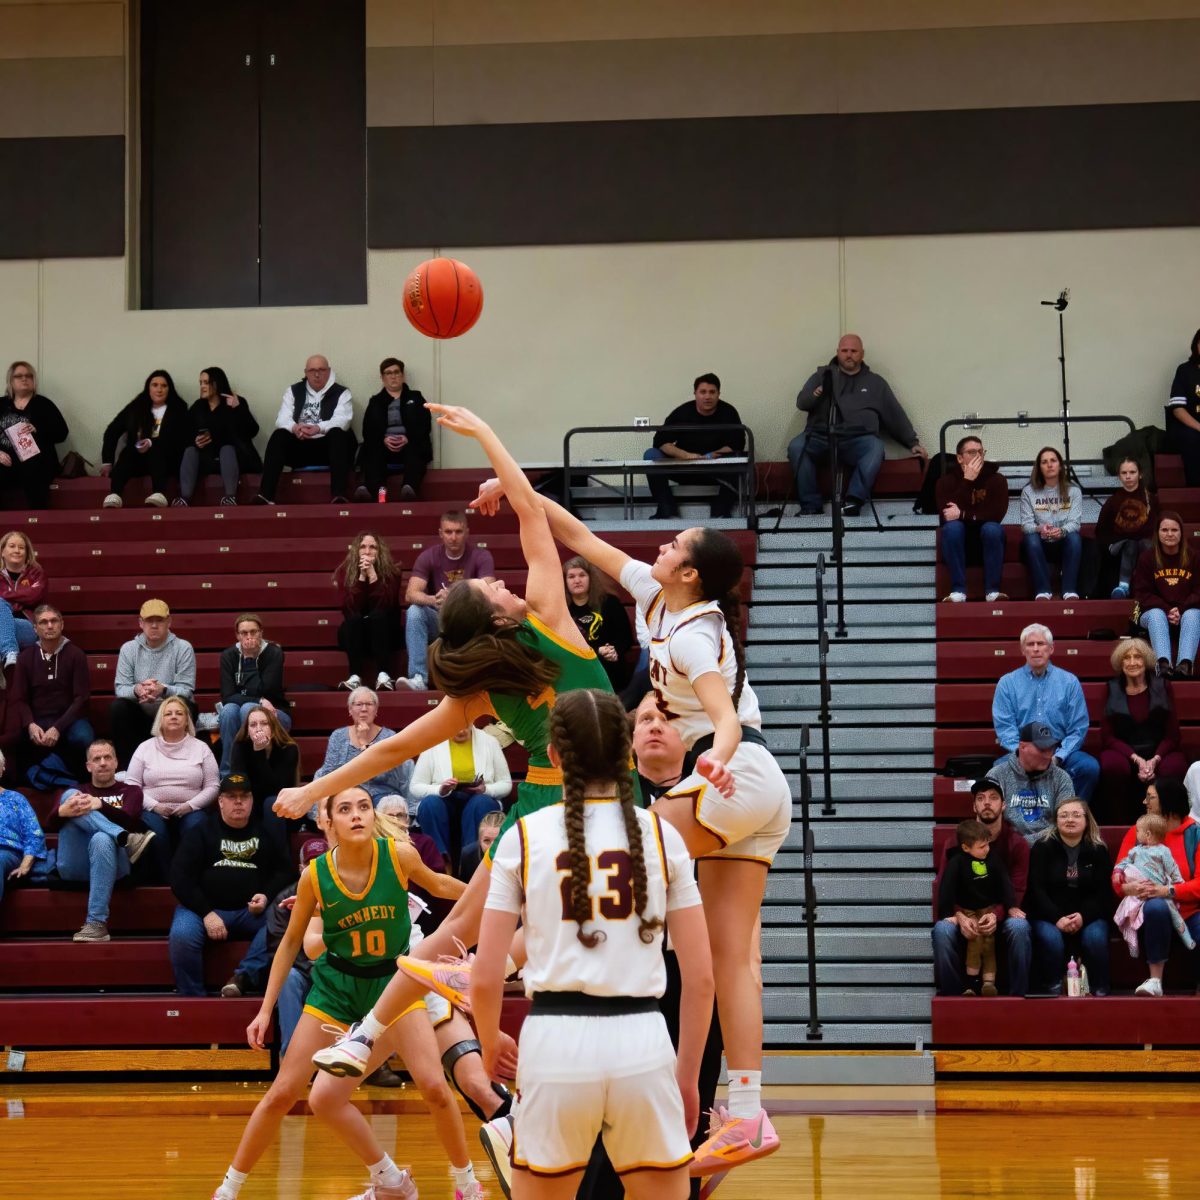 On Saturday, Feb. 17 the Ankeny Hawkettes faced off against Cedar Rapids Kennedy in the first round of the basketball playoffs. Sophomore Jayla Williams steps up to represent the Hawkettes at the tipoff.